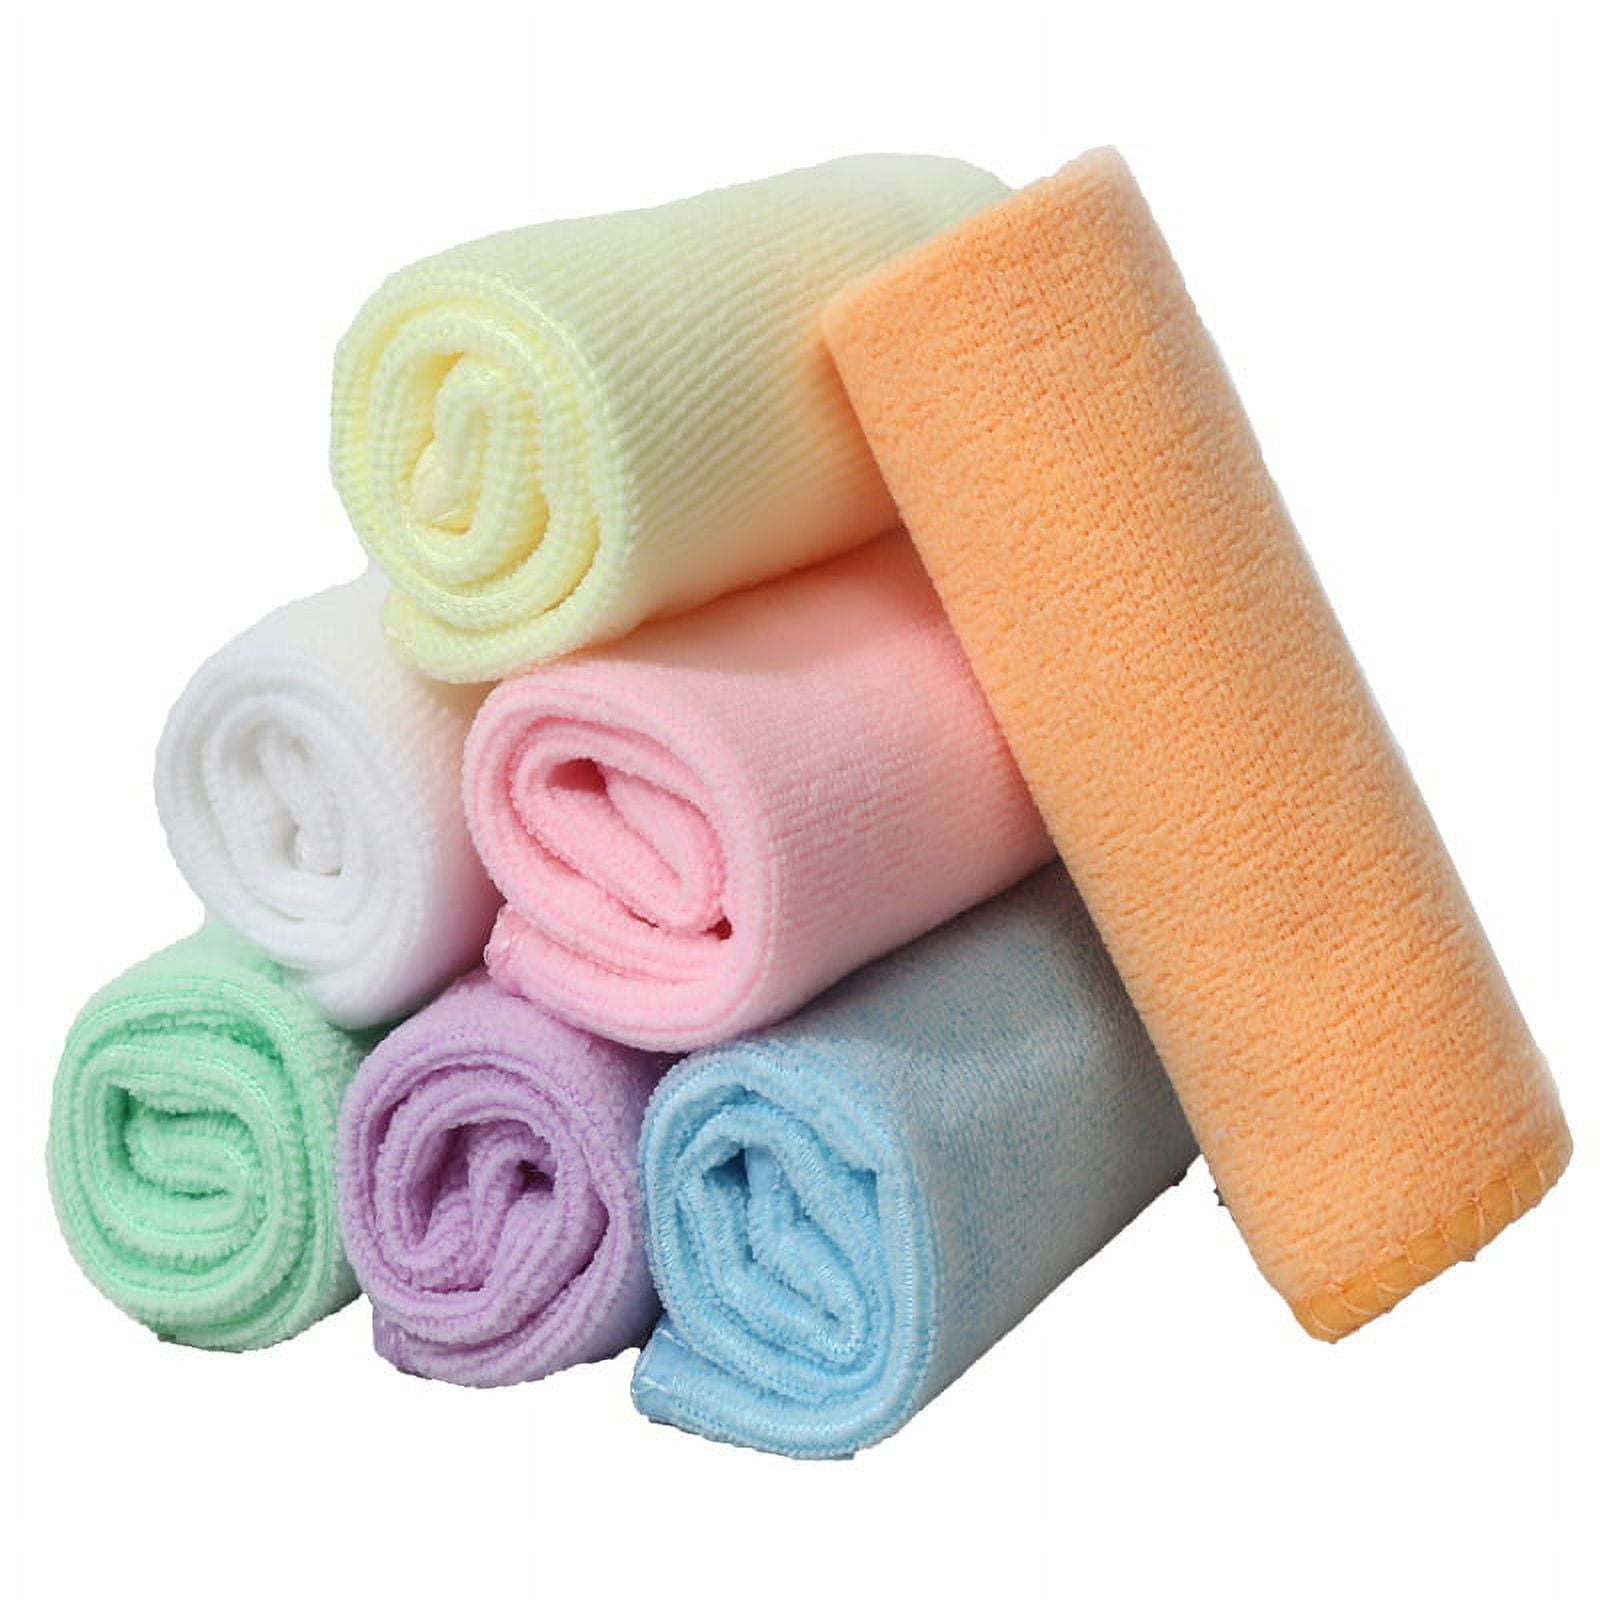 Advice on cleaning microfiber towels - 7Post - 7 Series Forum